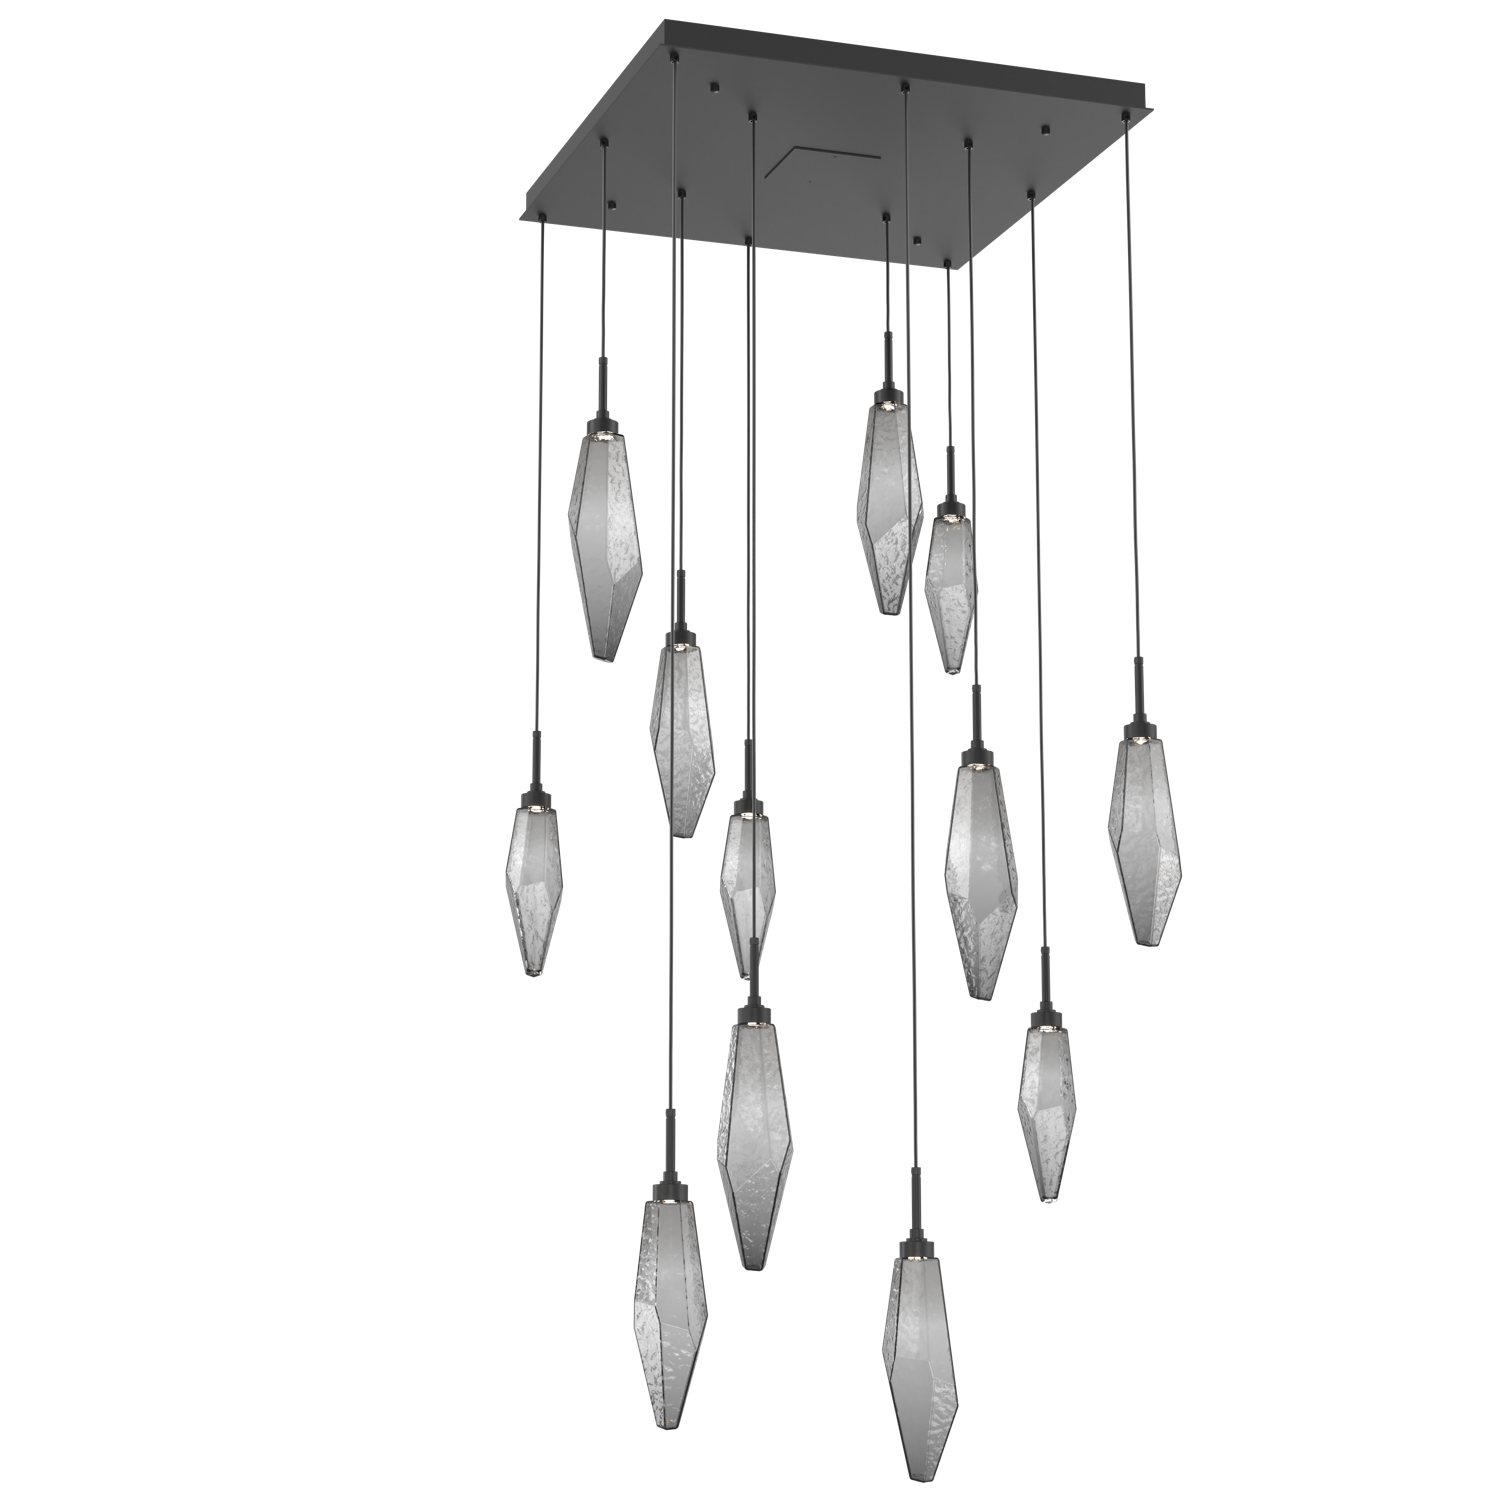 CHB0050-12-MB-CS-Hammerton-Studio-Rock-Crystal-12-light-square-pendant-chandelier-with-matte-black-finish-and-chilled-smoke-glass-shades-and-LED-lamping